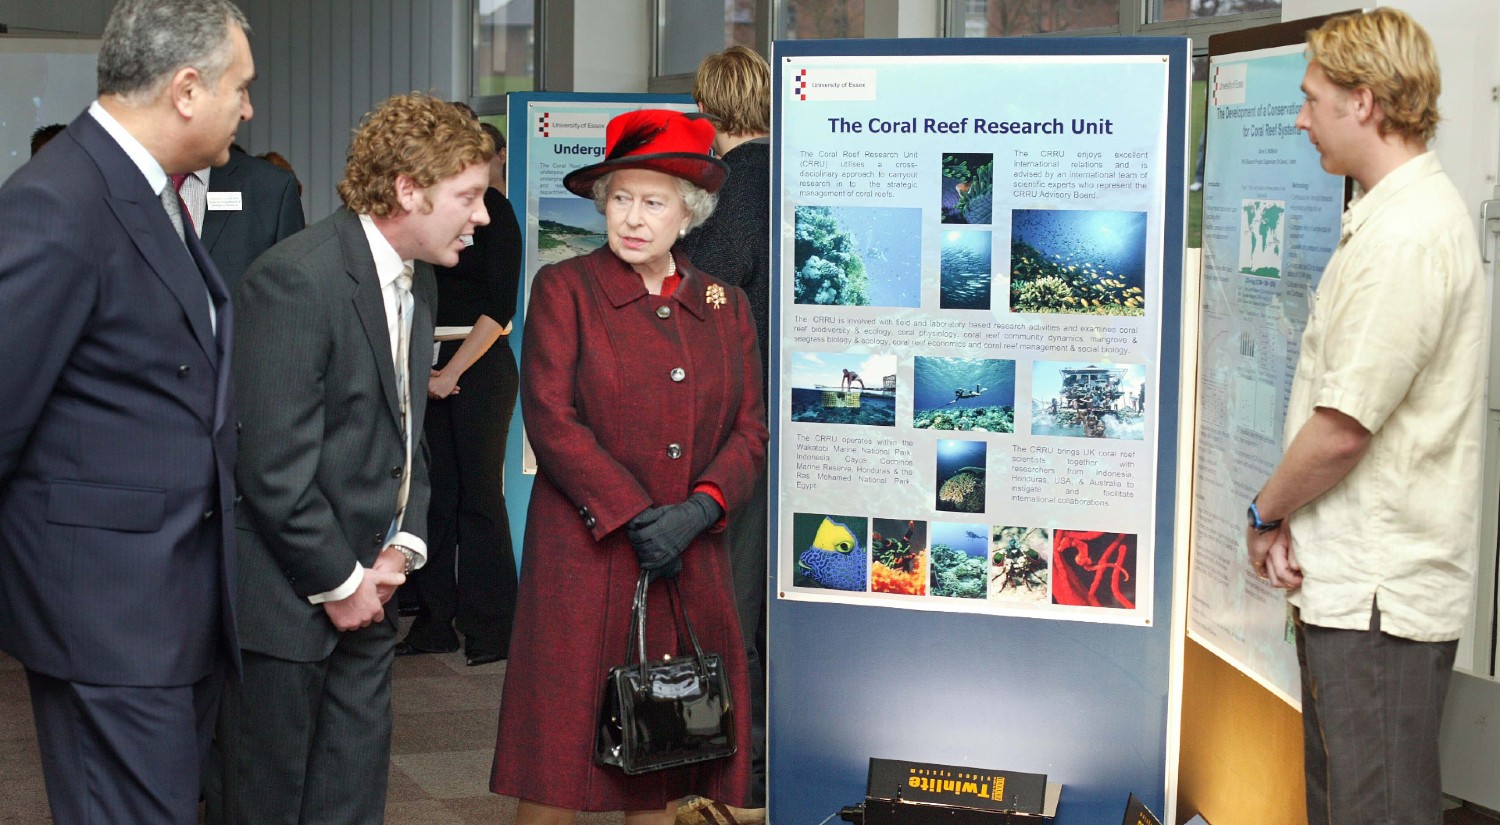 HM The Queen meeting Professor Dave Smith